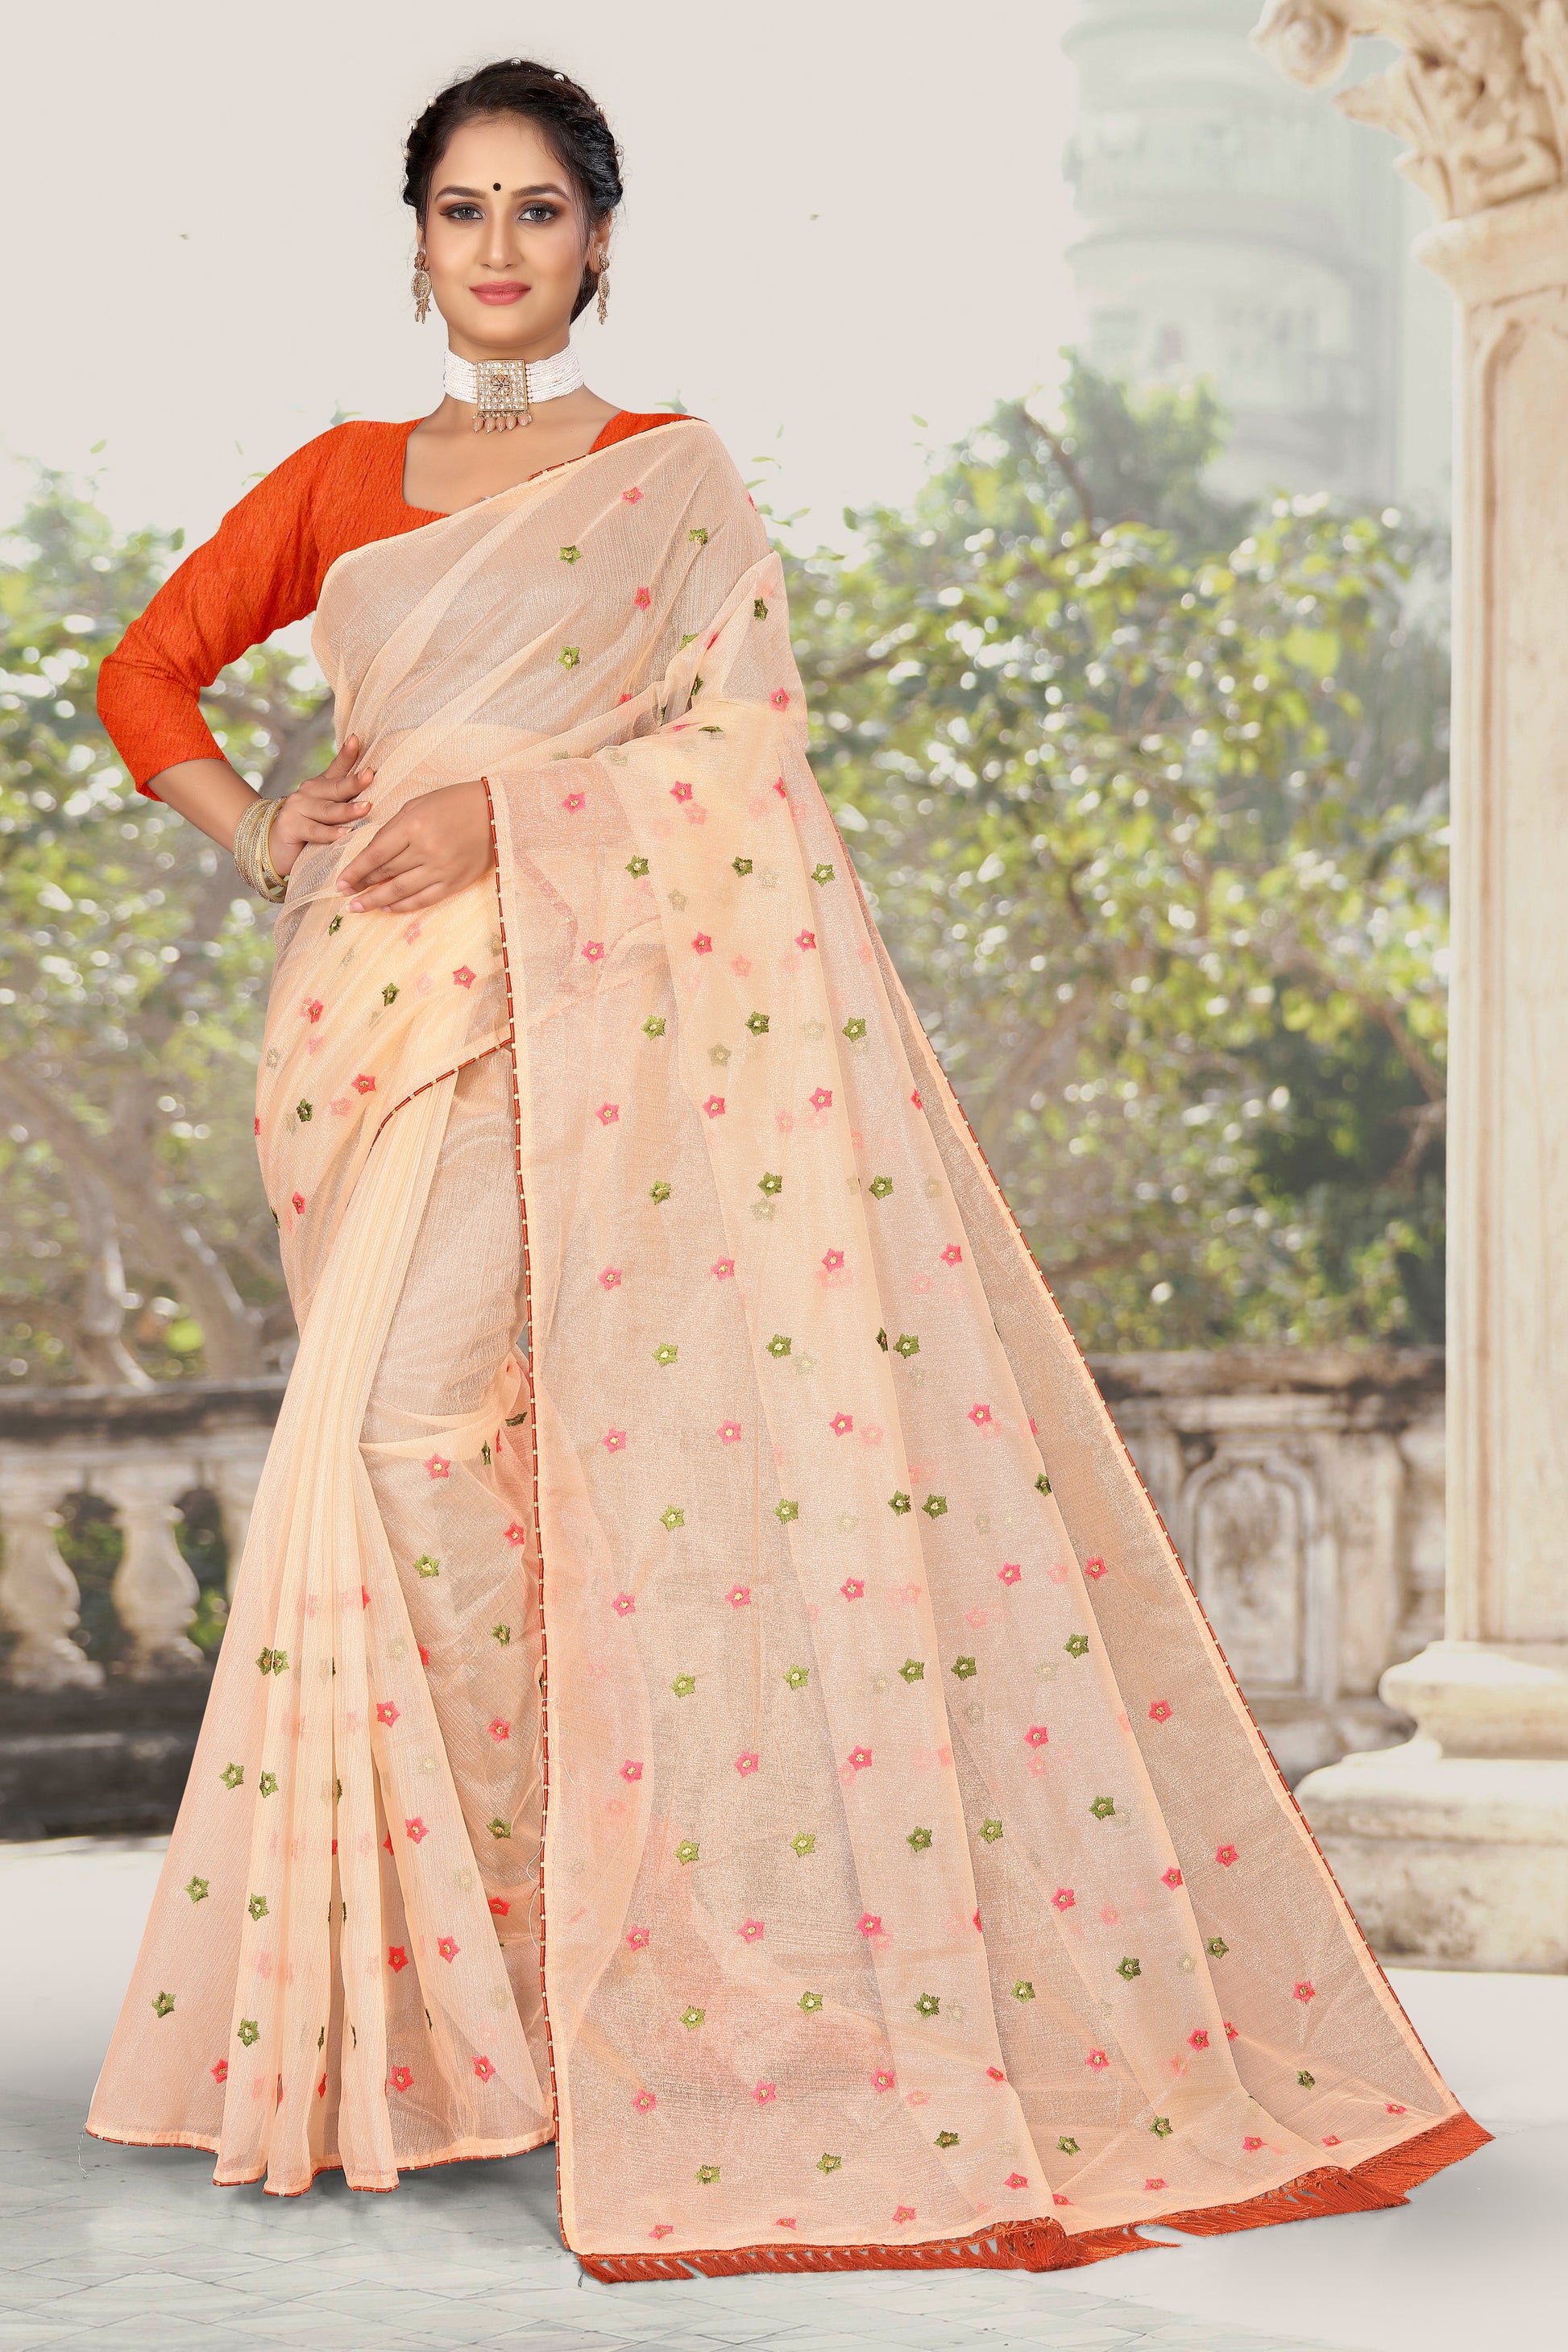 OFFICIAL ORGANZA COTTON WITH WORK IN WHOLE SAREE FOR ALL FORMAL OCCASIONS WITH ORANGE BLOUSE